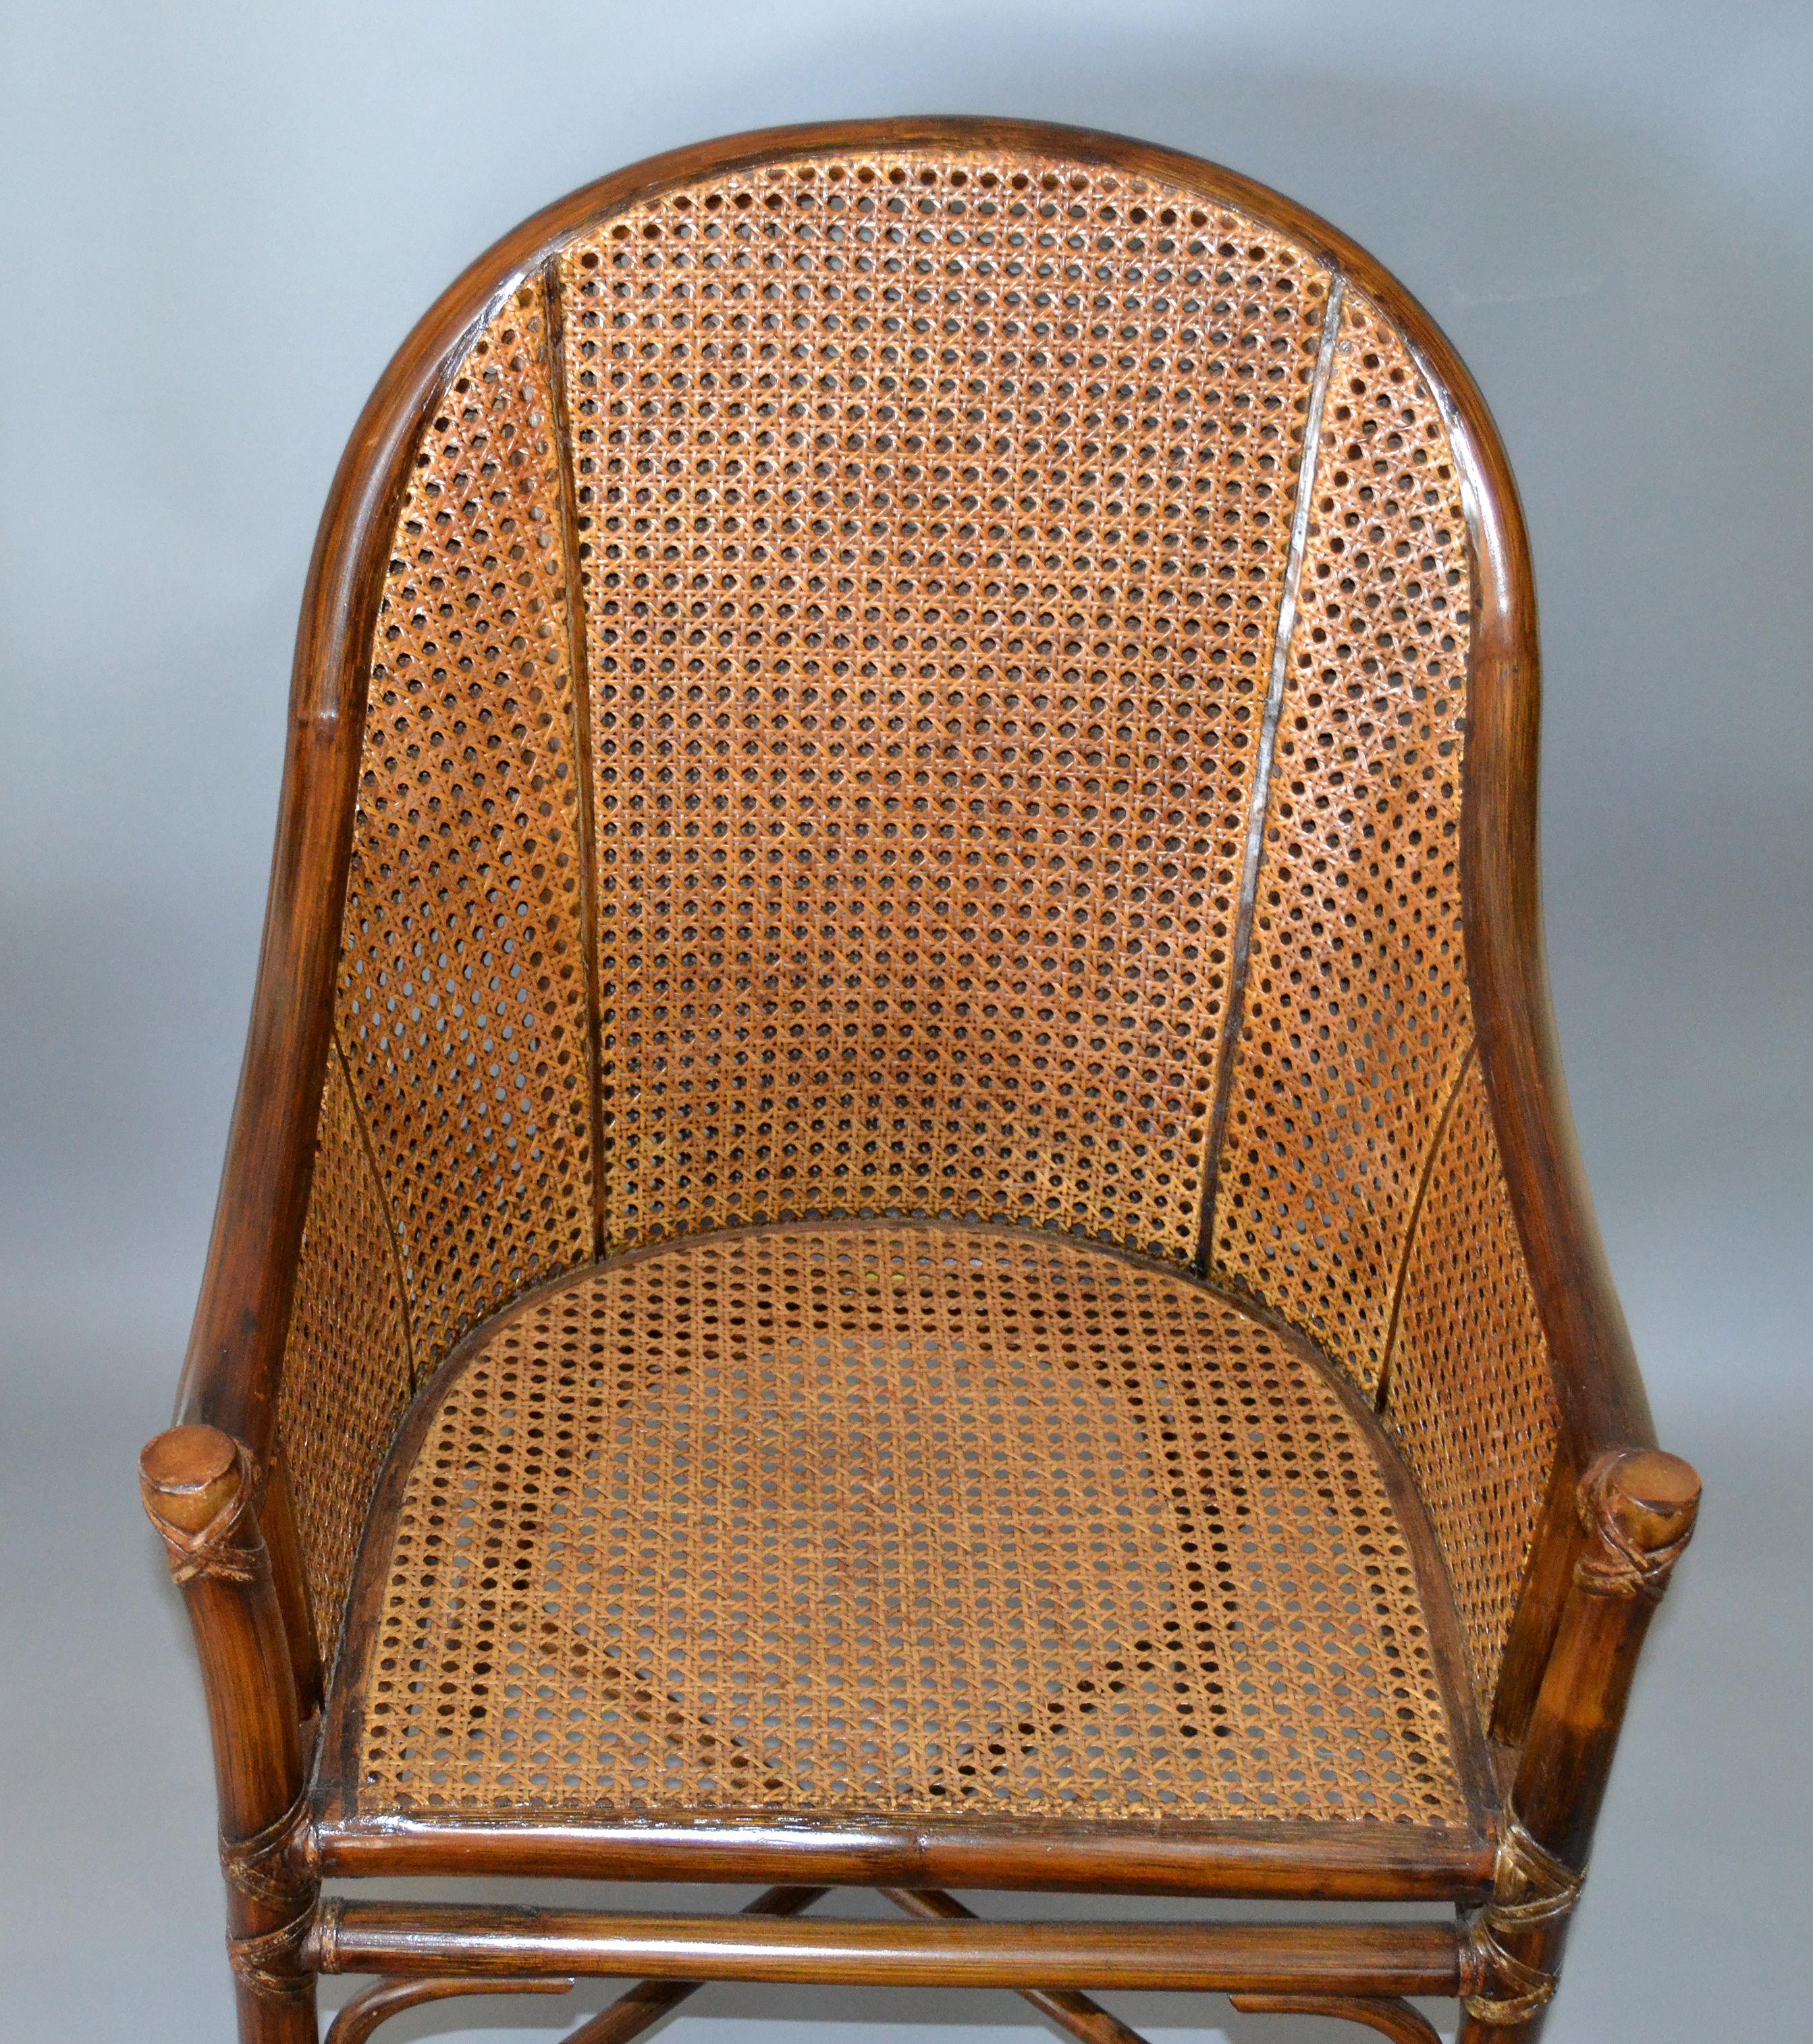 American McGuire Mid-Century Modern Bamboo and Cane Armchair Leather Bindings, Desk Chair